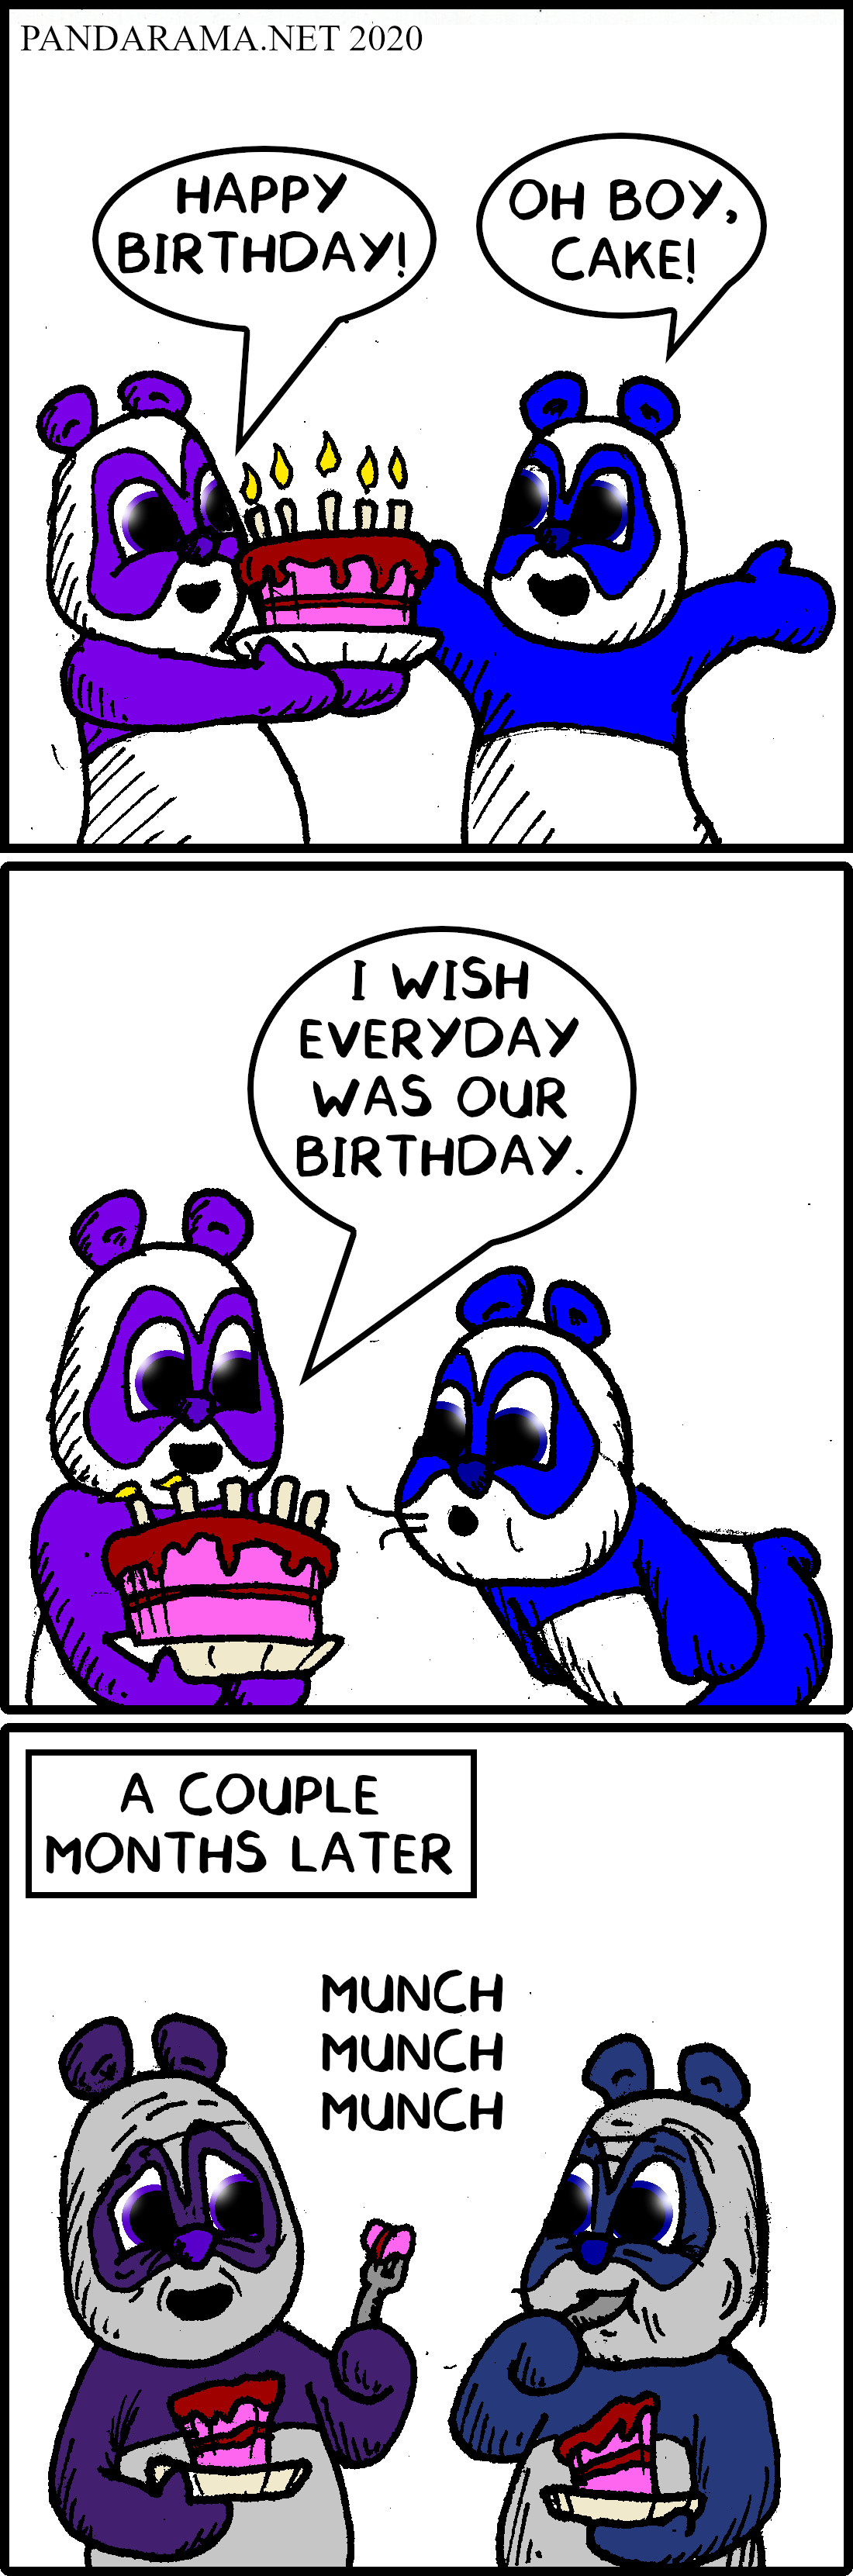 Panda wishes everyday was birthday, they get cake everyday and age fast.